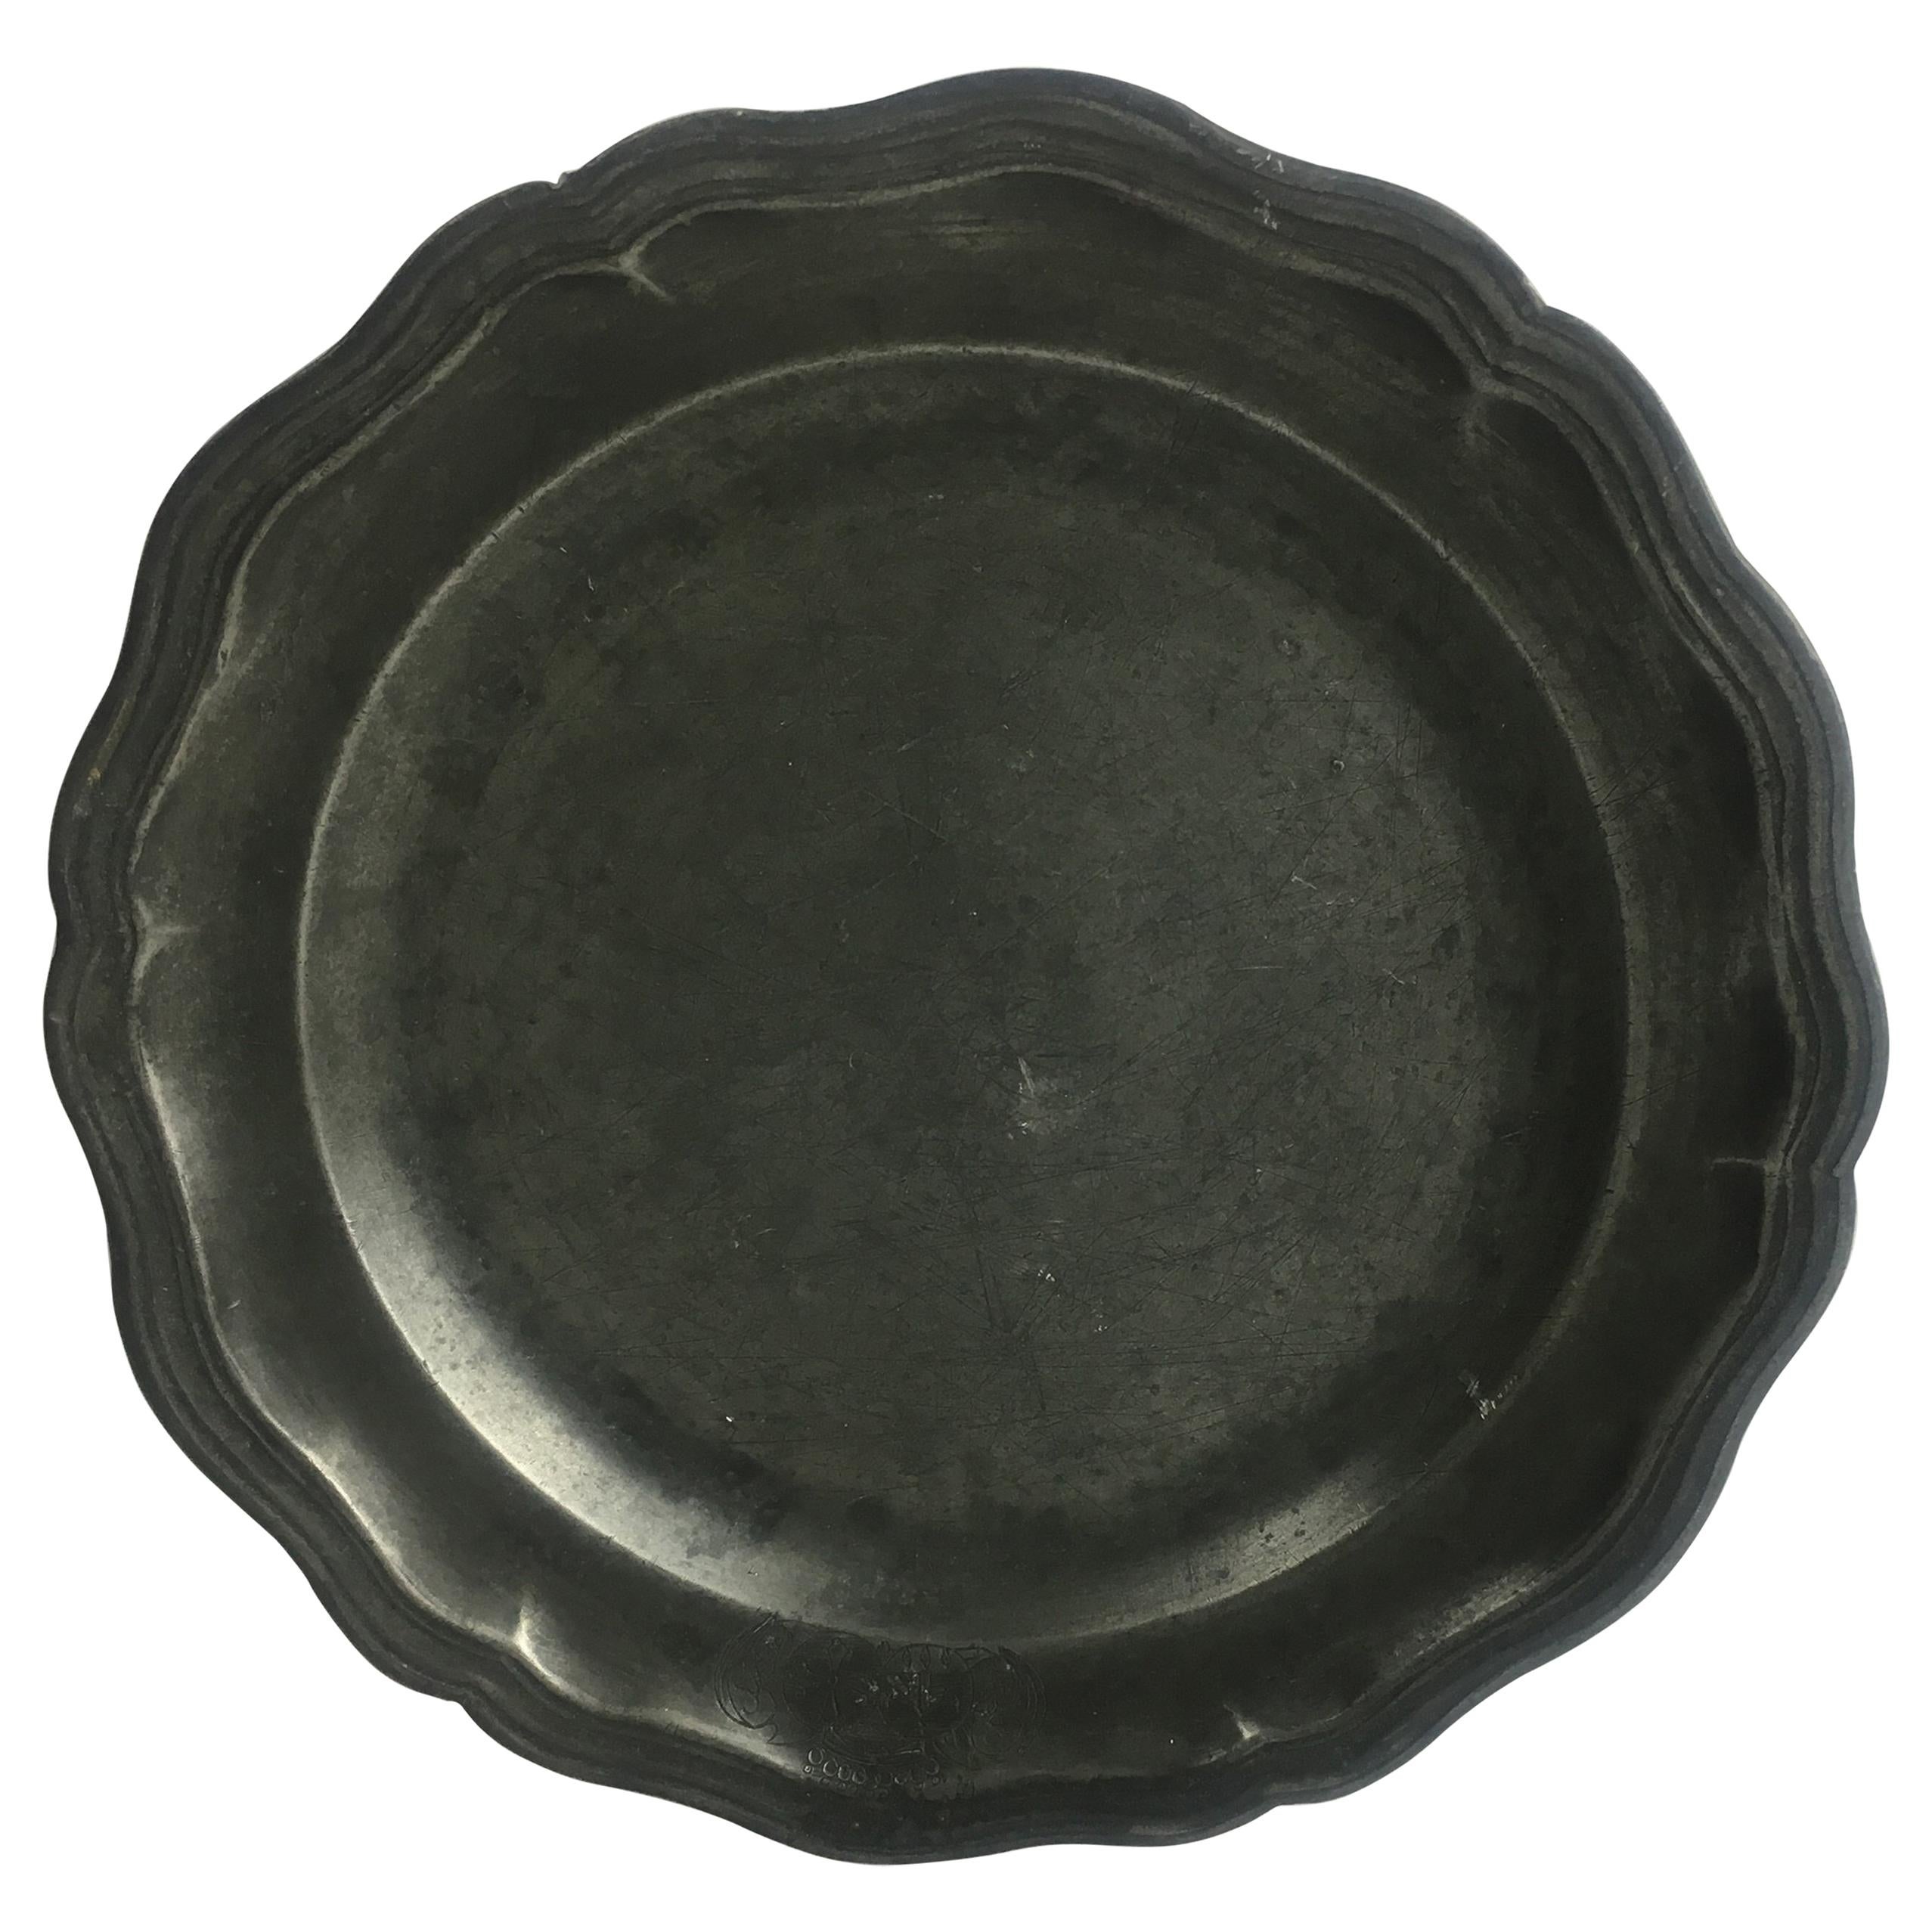 Late 18th-Early 19th Century French Pewter Plate